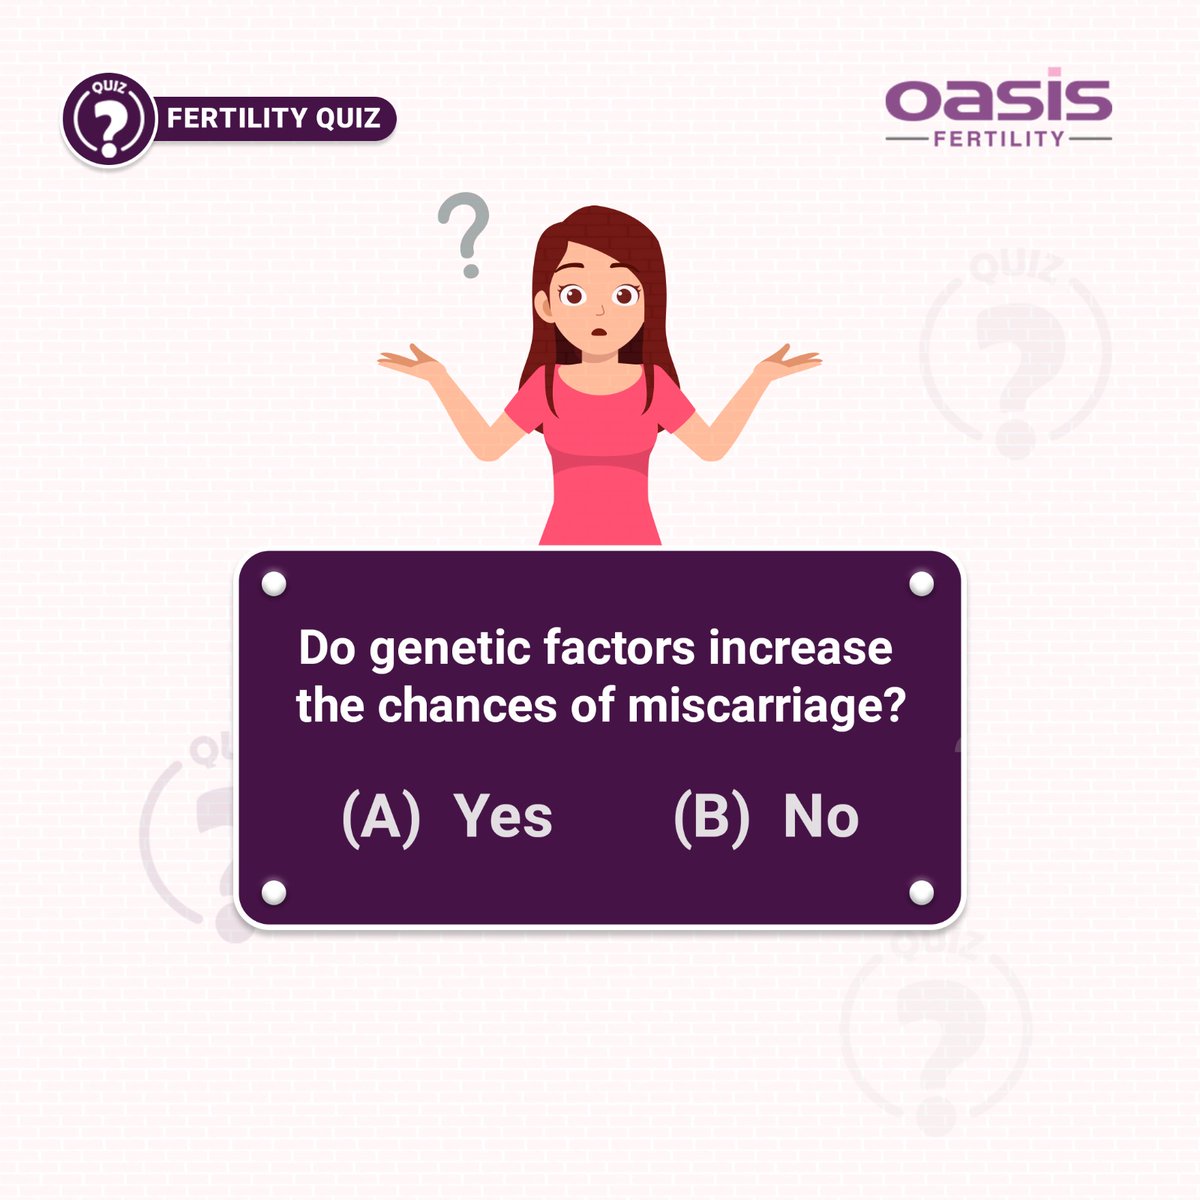 Let's test your fertility IQ with our fun fertility quiz.
#fertilityquiz #fertilityknowledge #fertilityfacts #fertilityawareness #fertilityeducation #fertilitytest #fertilityjourney #fertilitytips #fertilityawarenessmonth #fertilityhealth